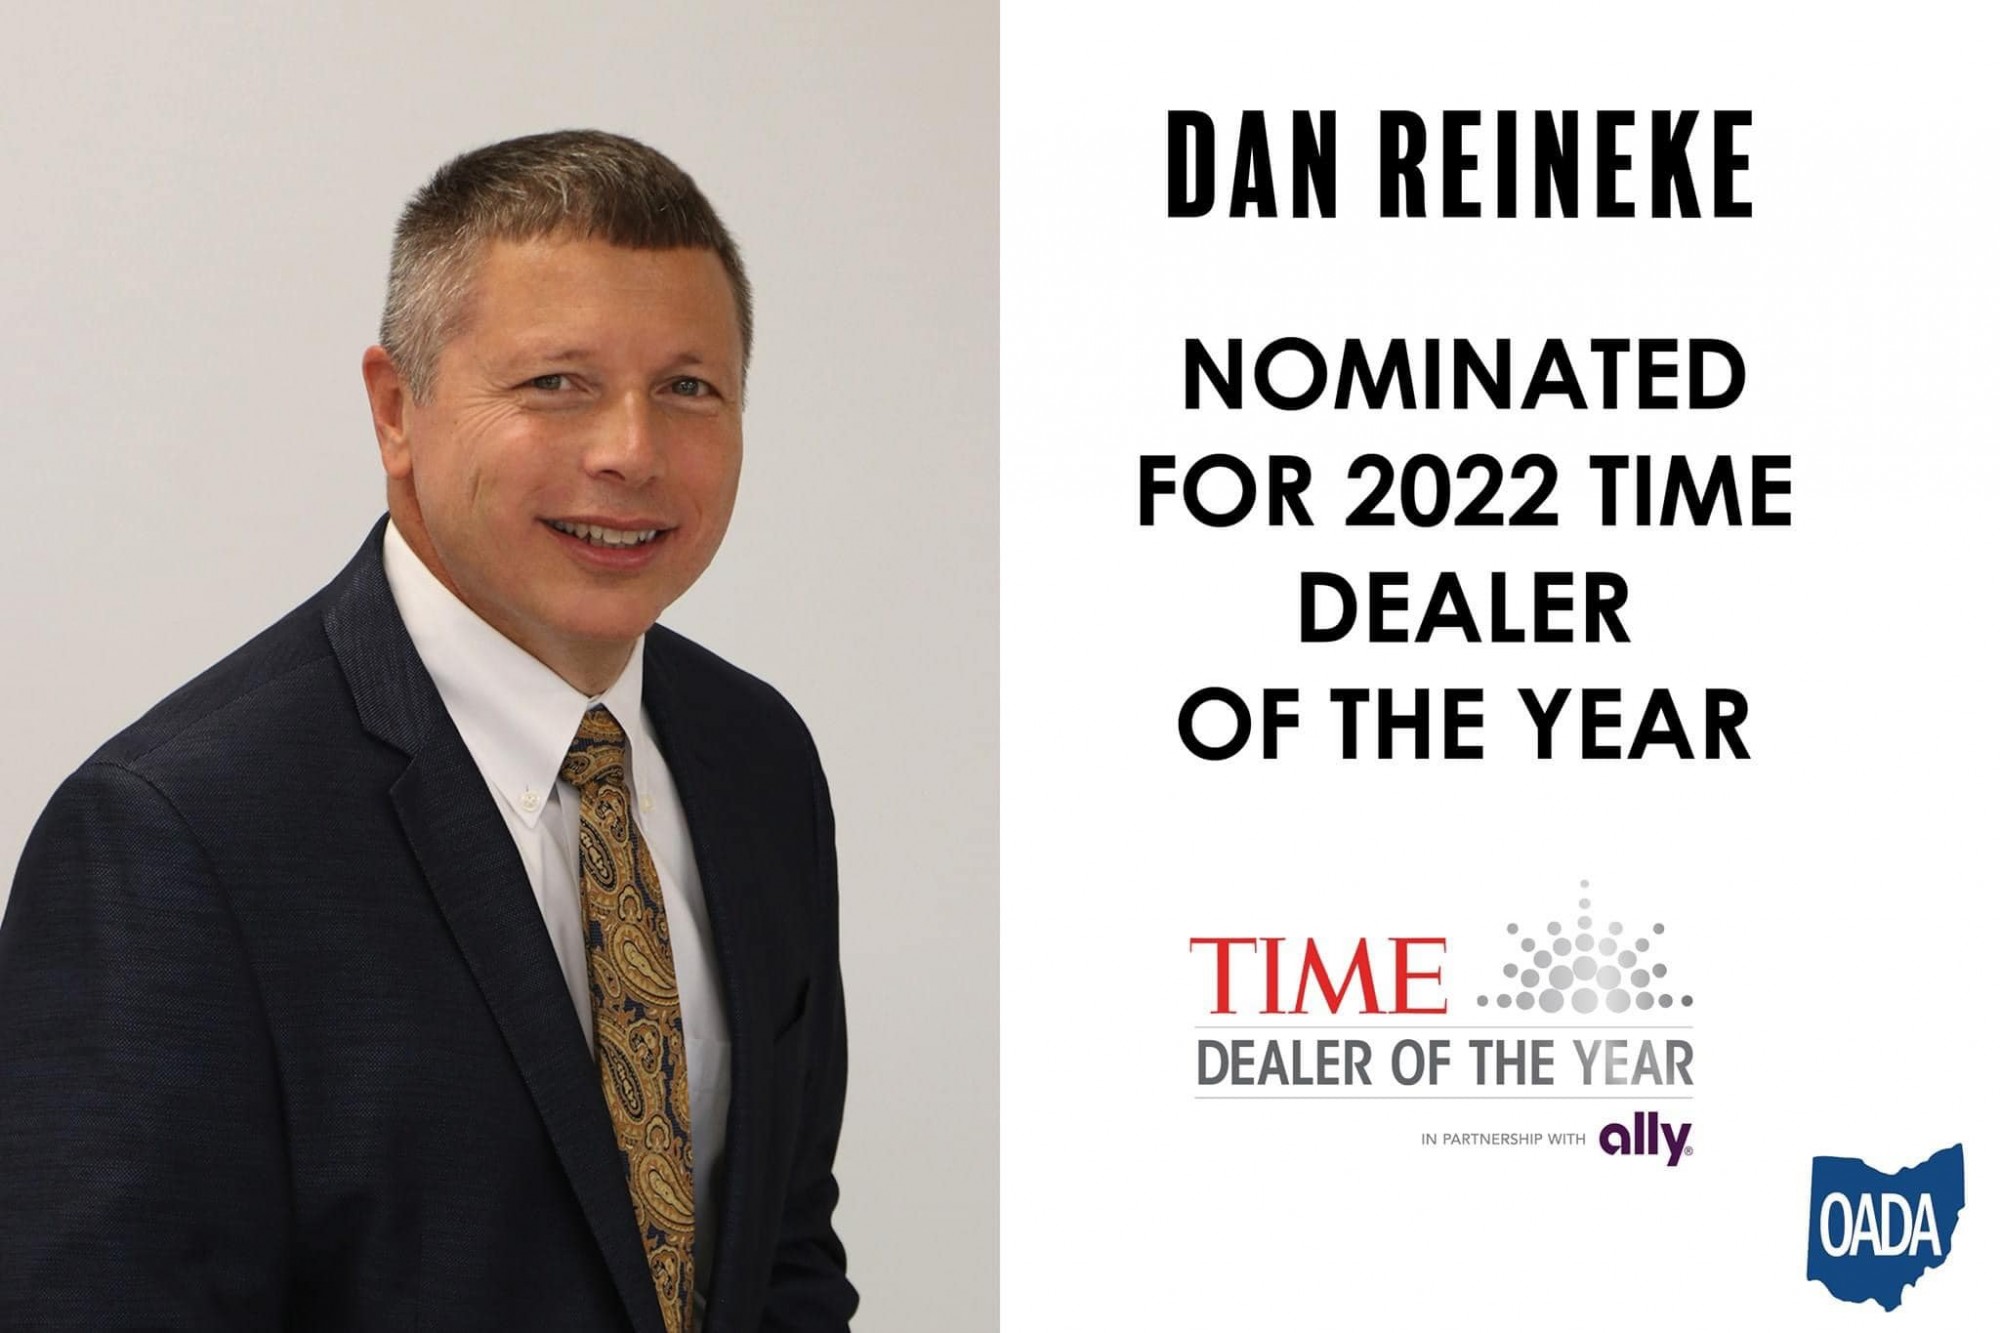 Dan Reineke Nominated for 2022 TIME Dealer of the Year